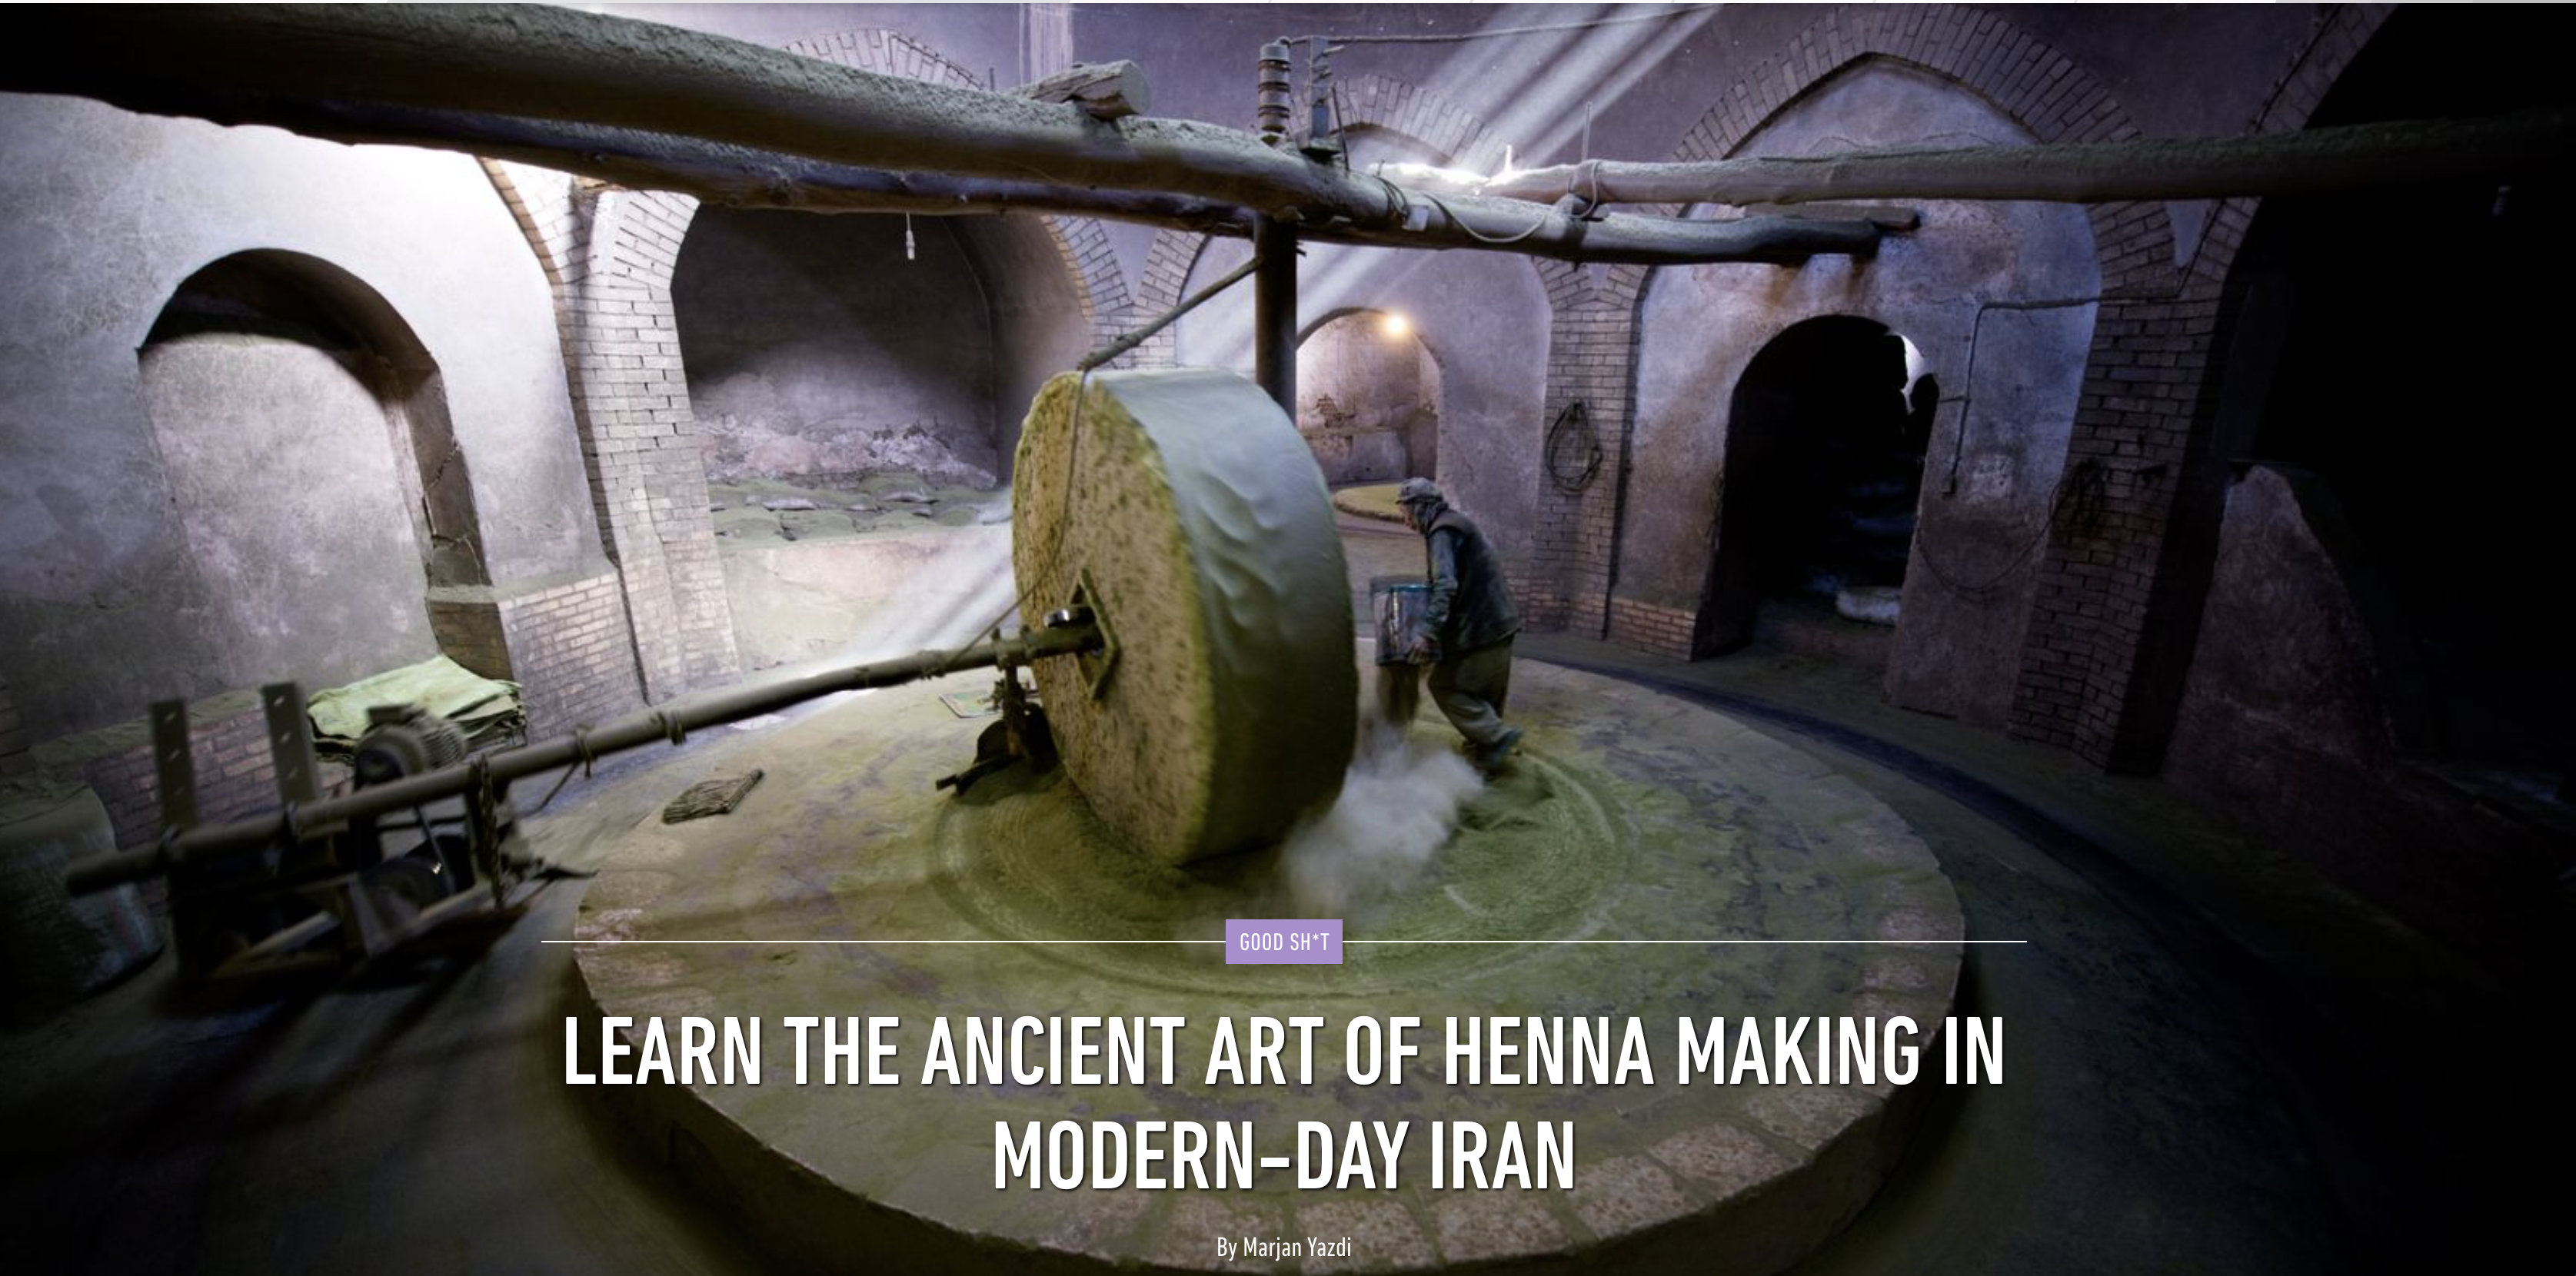 Learn The Ancient Art Of Henna Making In Modern-Day Iran